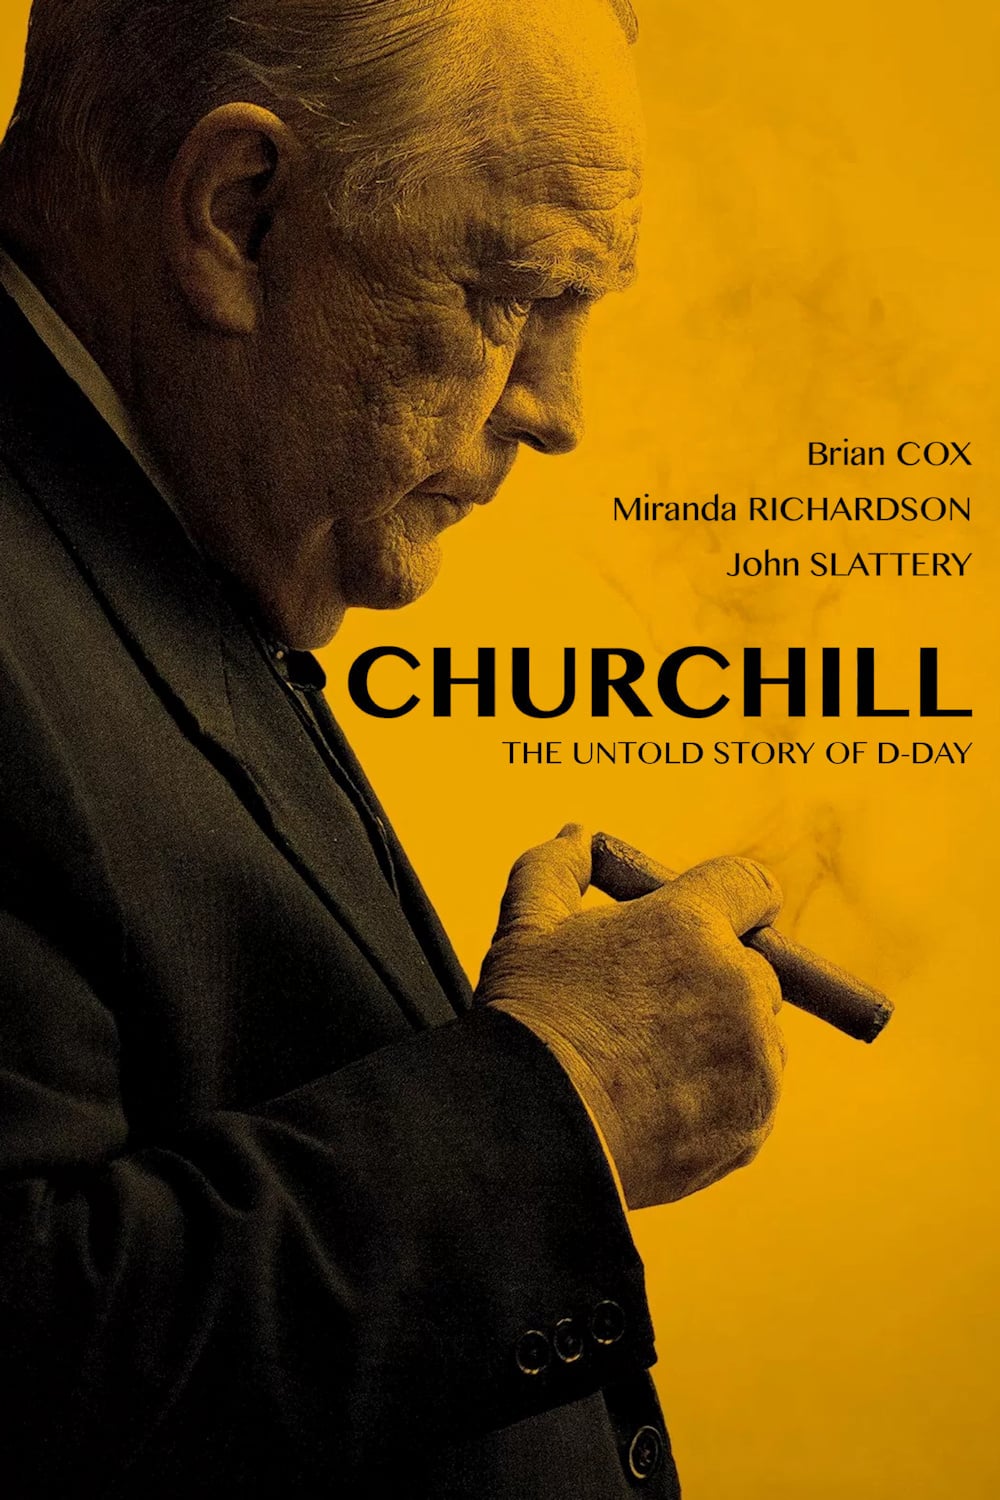 Poster for the movie "Churchill"